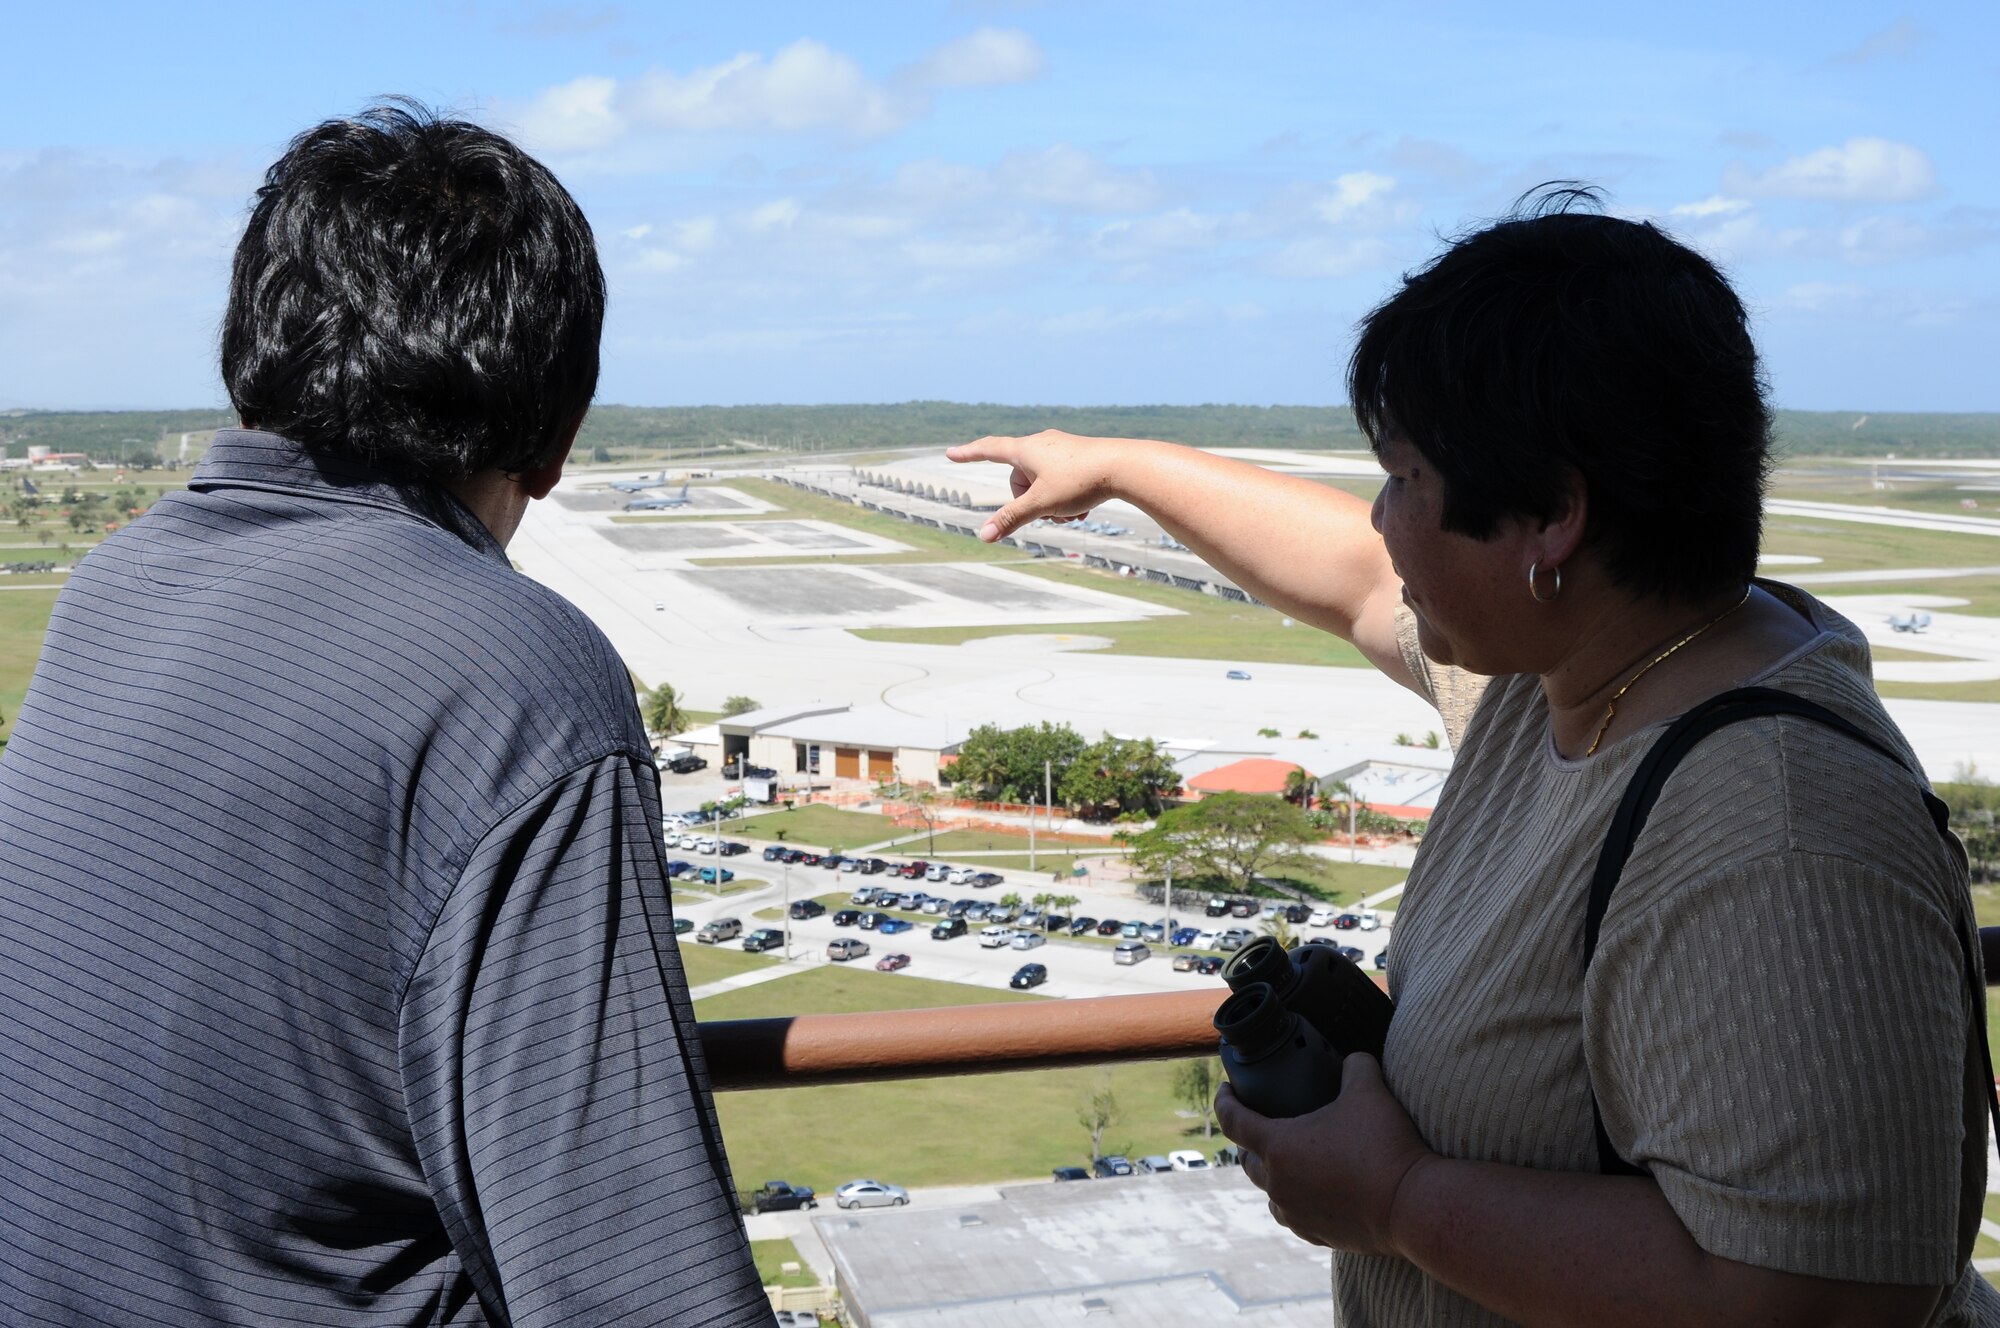 ANDERSEN AIR FORCE BASE, Guam- Honorable Ronald "Ron" J. Flores (Left) Vice
Mayor of Yigo, Guam, and Honorable Melissa B. Savares, Mayor of Dededo,
Guam, overlook the base from the air traffic control tower during a visit
April 3. The mayor from Dededo and vice mayors from Dededo and Yigo visited
Team Andersen to discuss flight operations with senior officials and to
discuss more ways the base and community could continue to work together.
(U.S. Air Force photo/Senior Airman Carlin Leslie)
